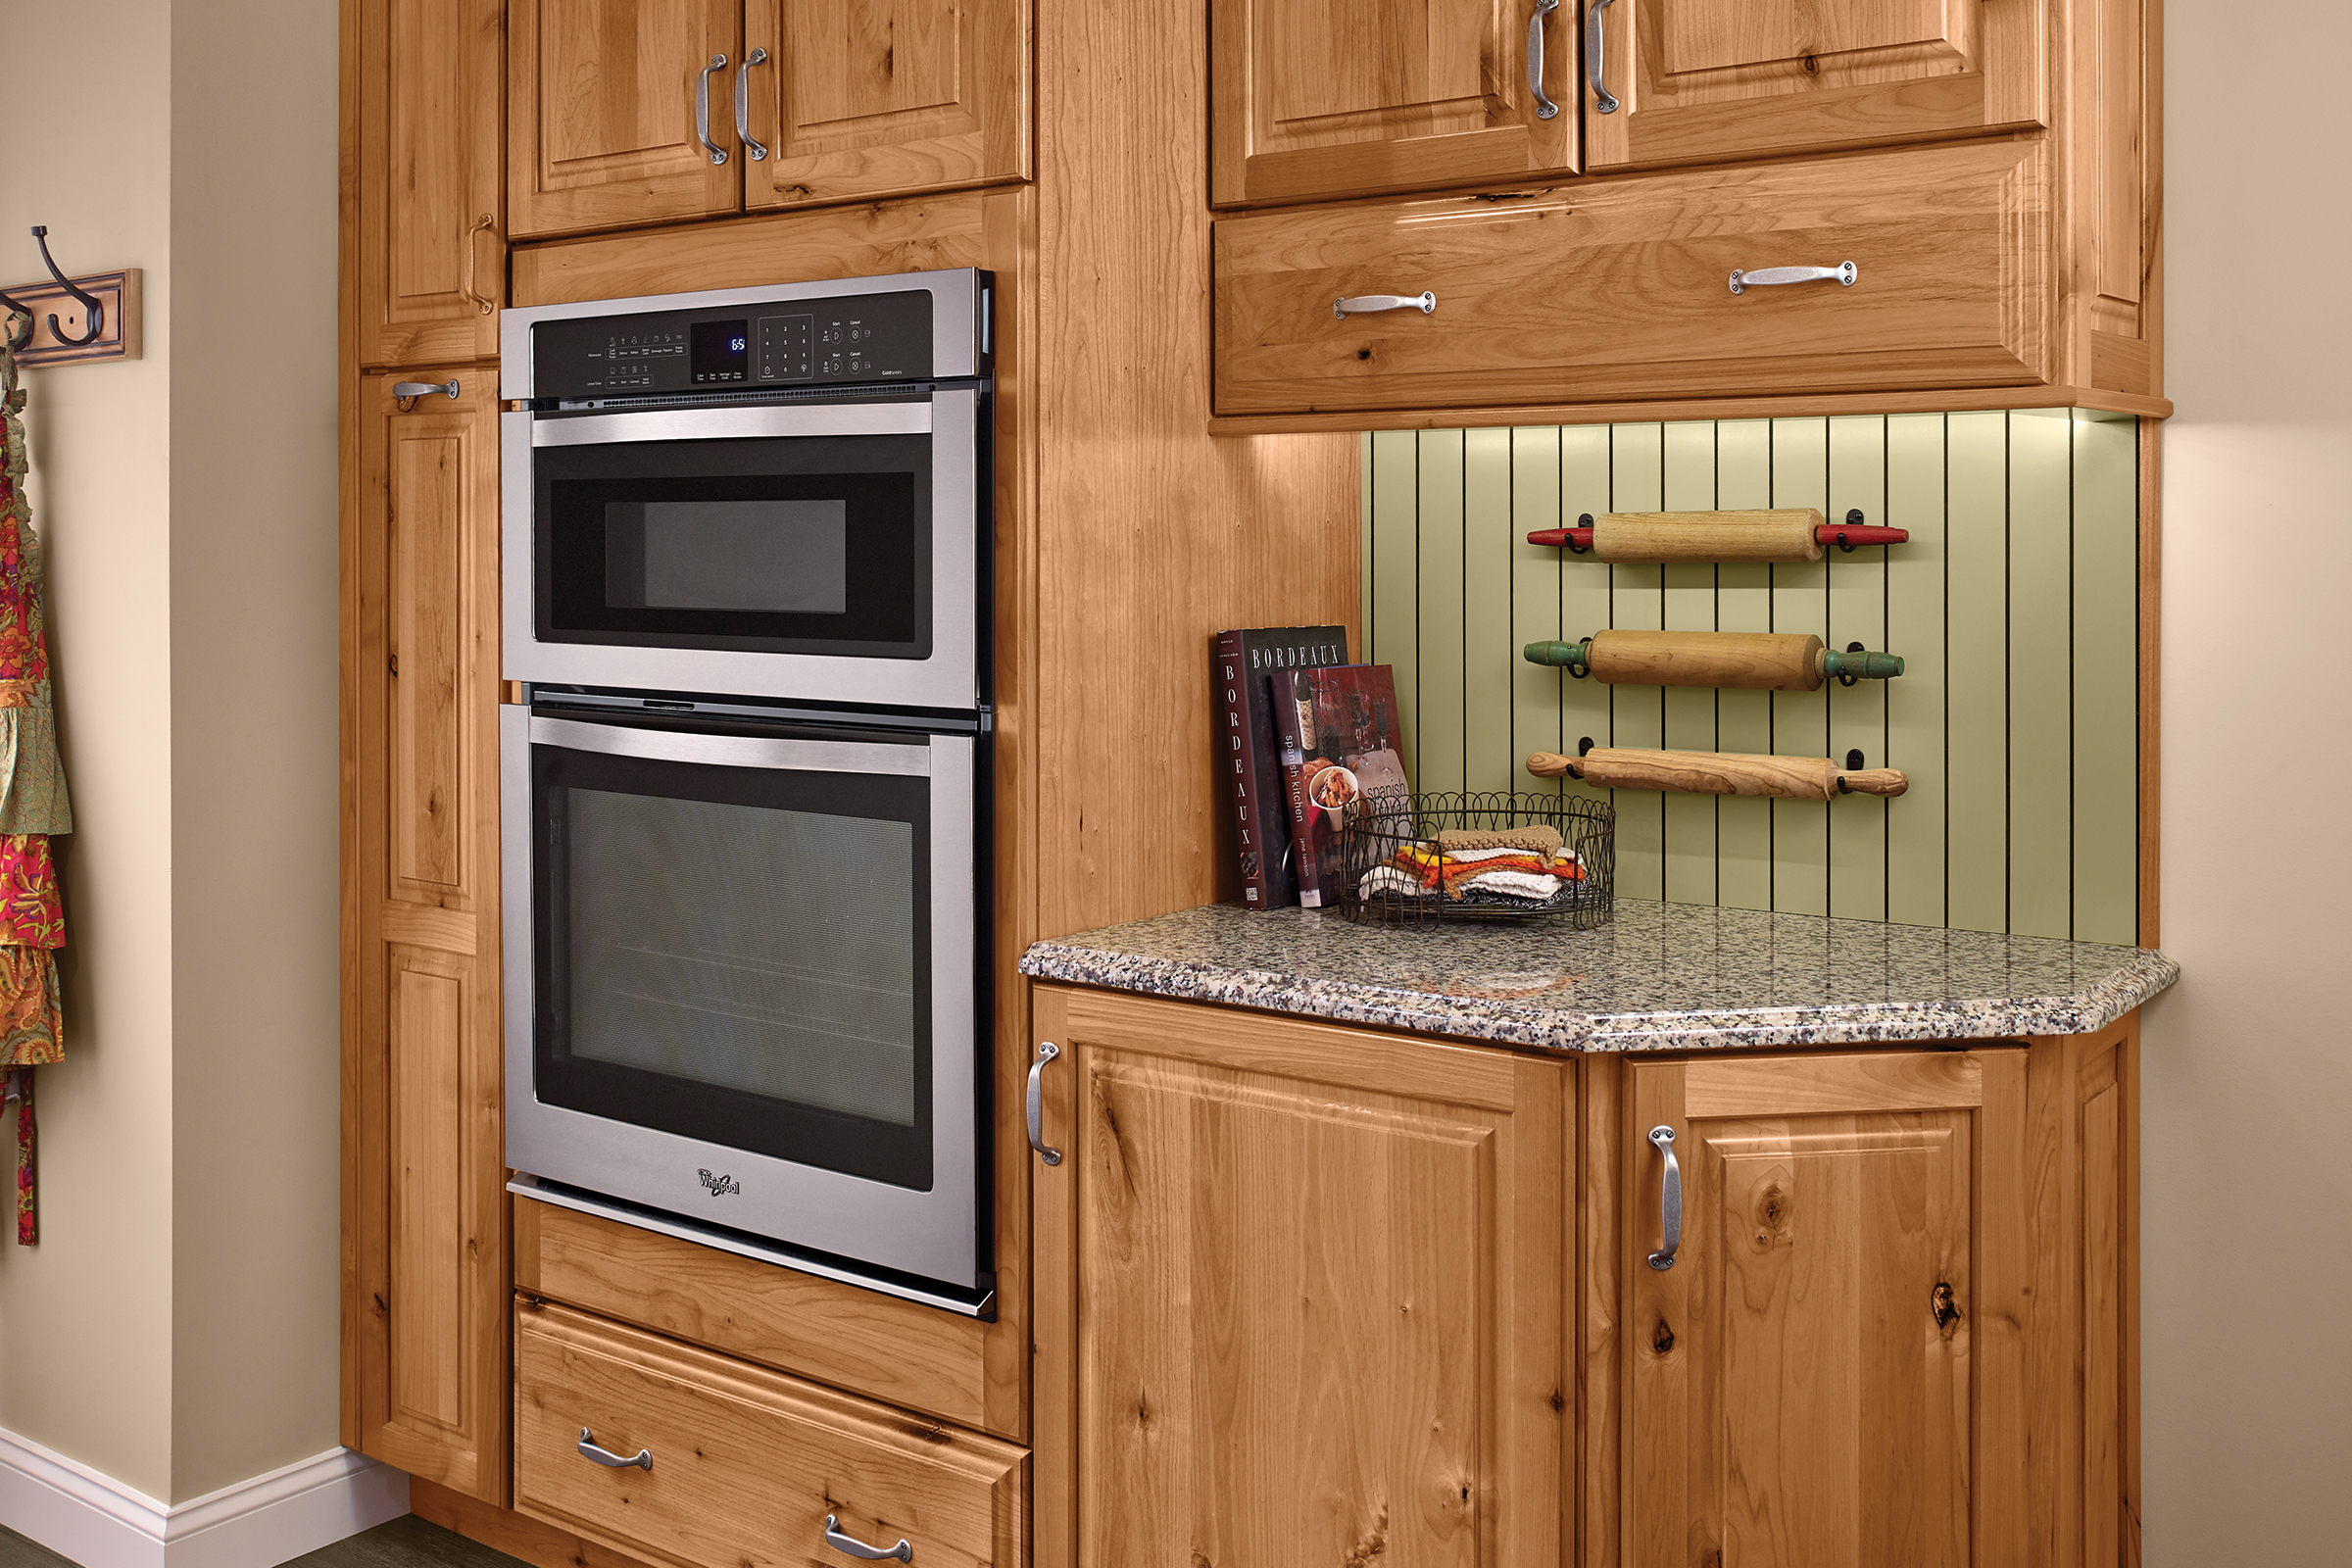 How to Install an Over-the-Range Microwave to Save Kitchen Space